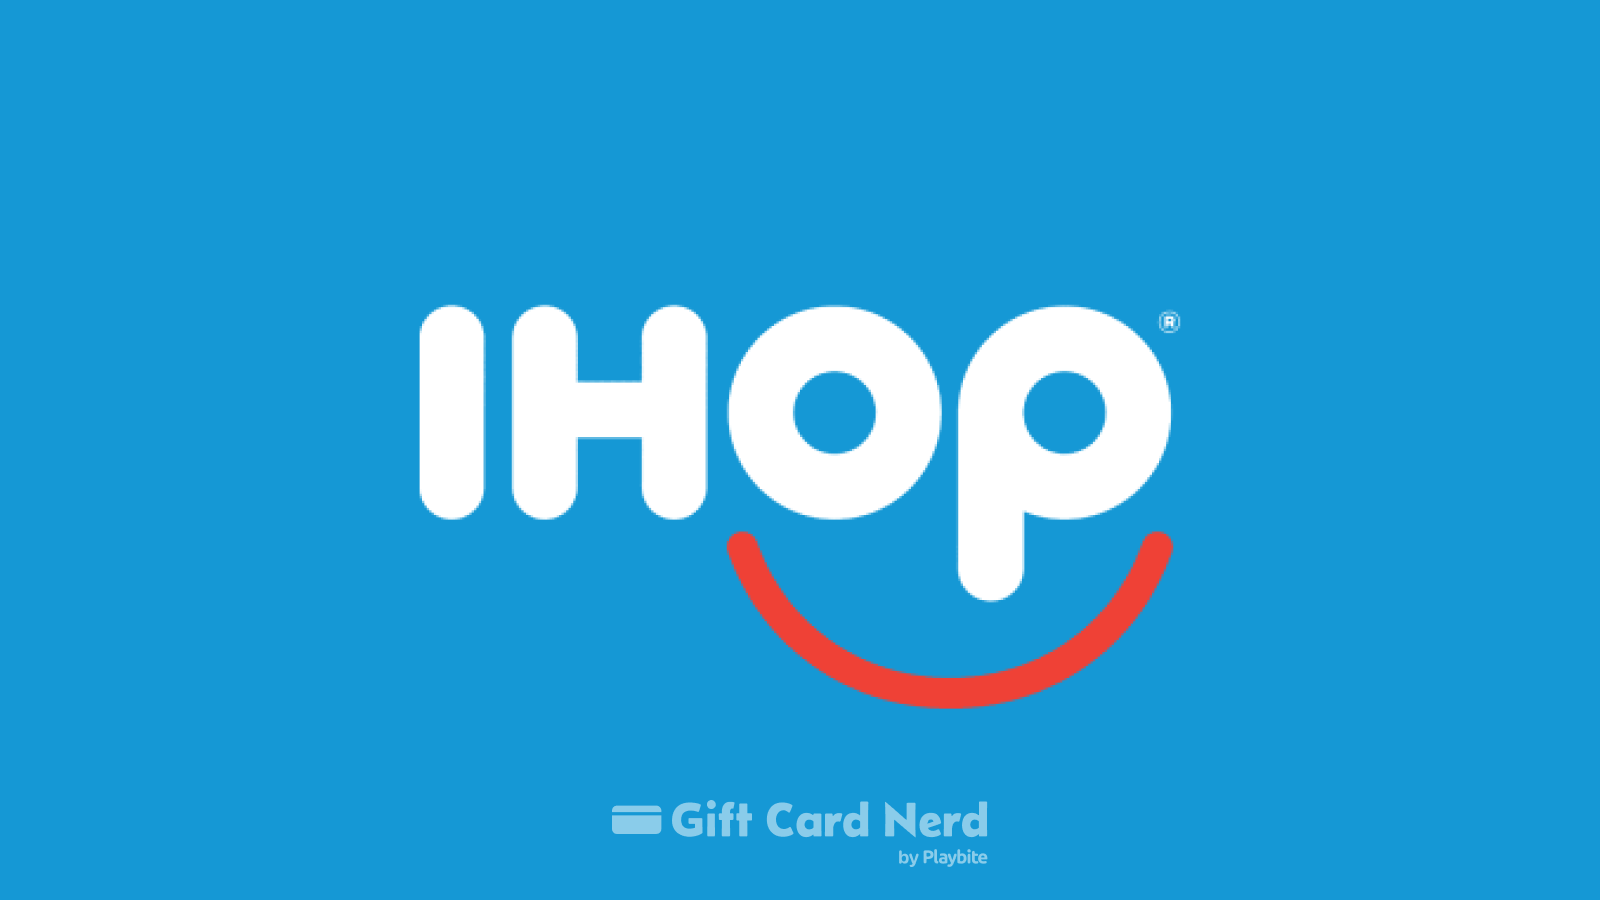 Can I Use an IHOP Gift Card on Venmo?